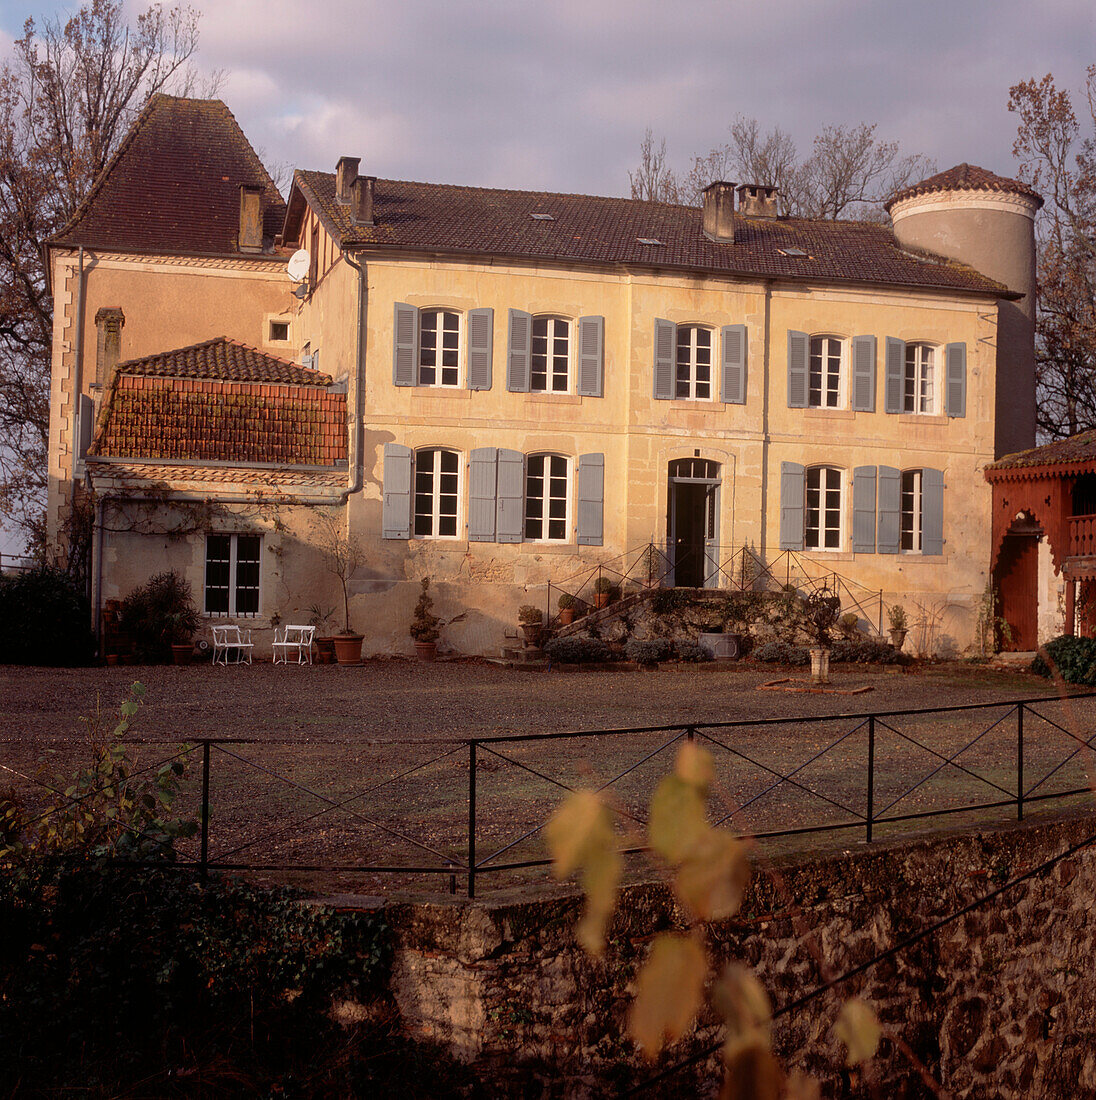 Large period French chateau with gravel driveway